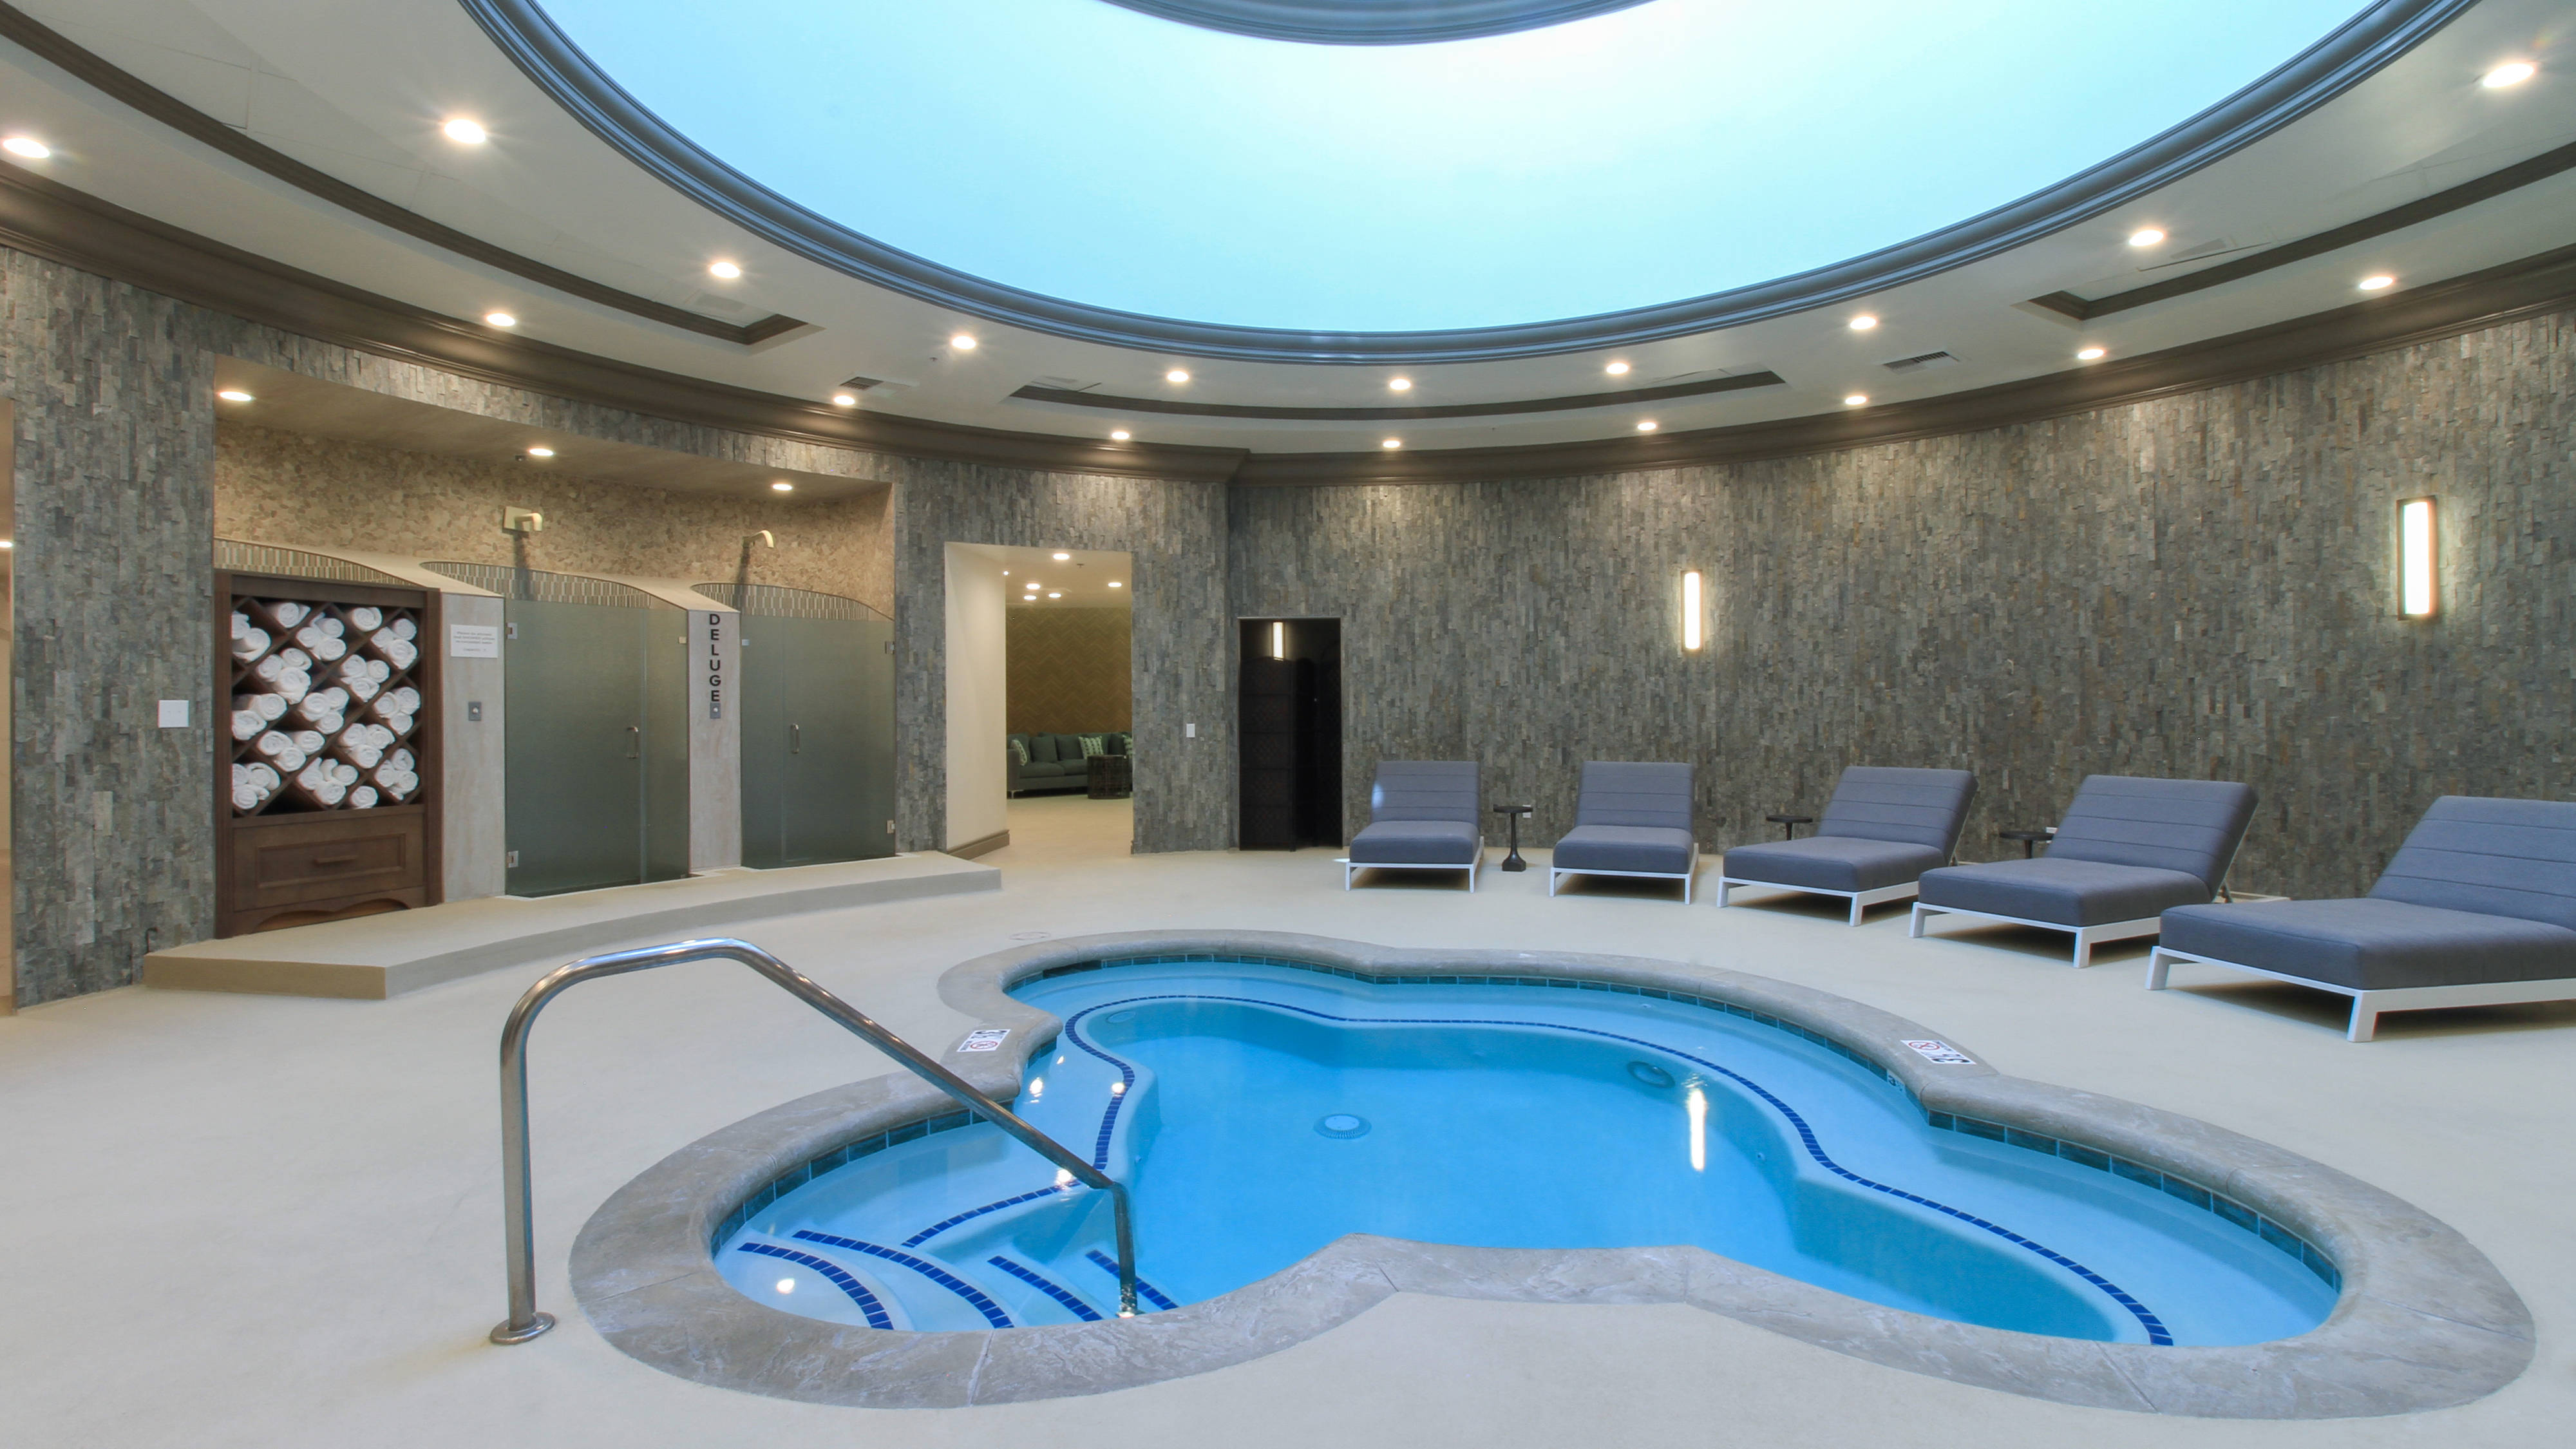 Overview - Spa Aquae, Healing and Renewal, Water Therapy, Fitness,  Facials, Massage